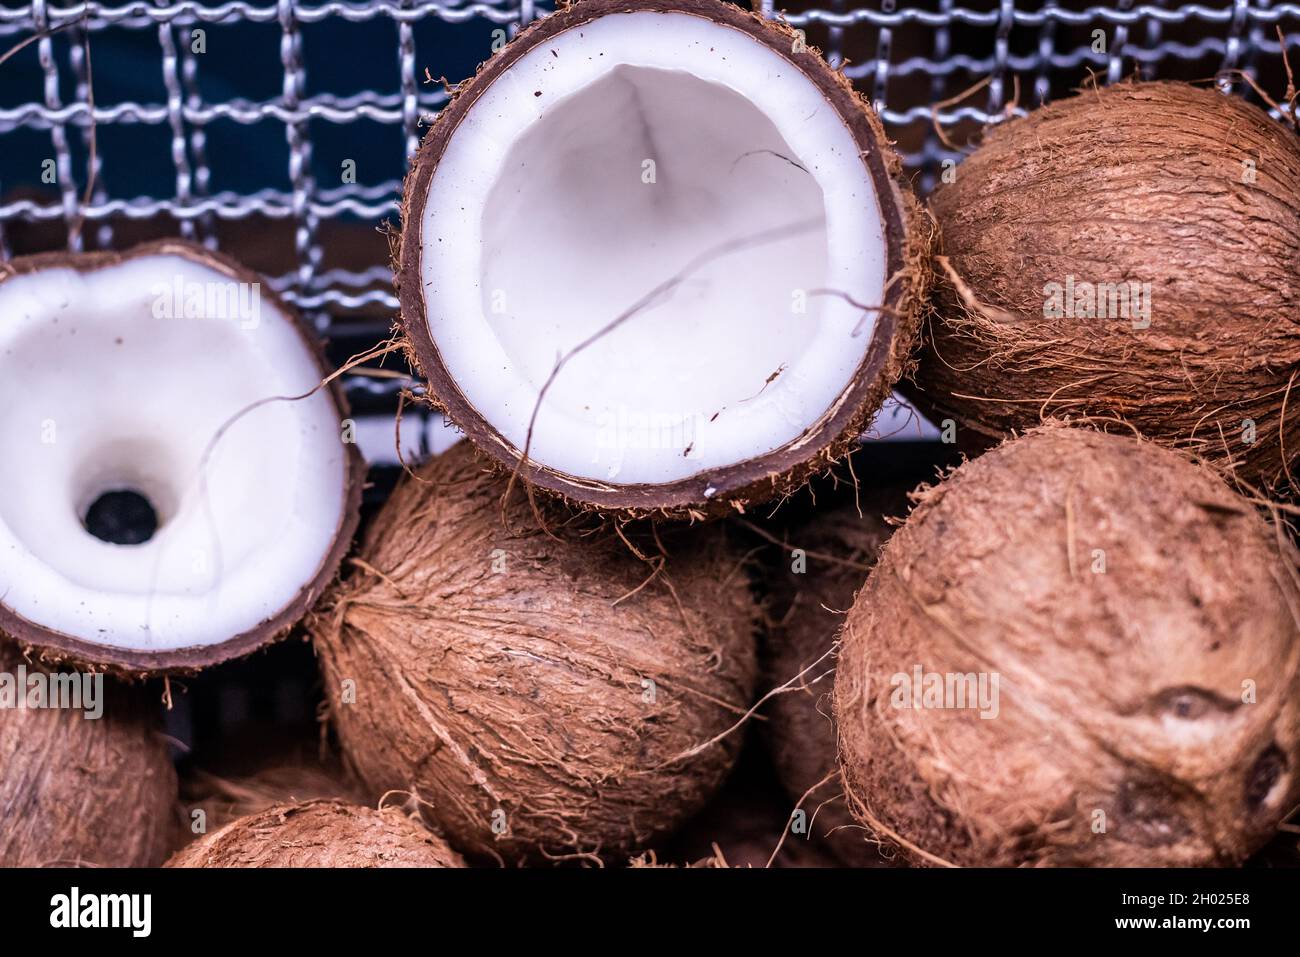 Coconuts for sale at the famous and grandiose São Joaquim fair in Salvador, Bahia, Brazil. Stock Photo